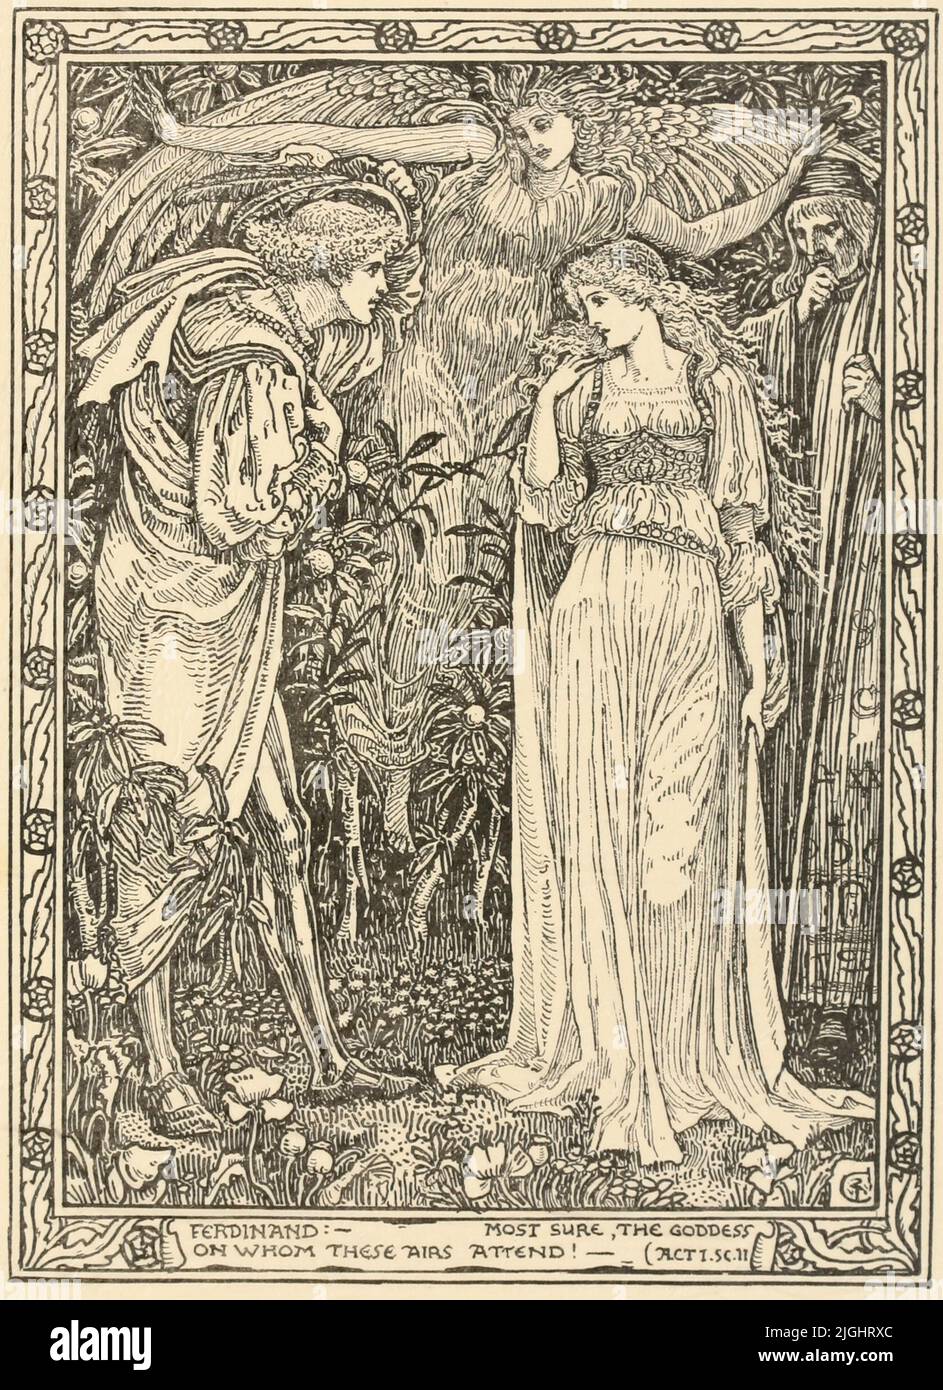 Ferdinand - Most Sure, the goddess on whom these airs attend [Act 1 Scene II] Illustrations to Shakespeare's Tempest by Walter Crane, 1845-1915; Engraved by Duncan C Dallas, Publication date 1894 Publisher London : J. M. Dent ; Boston : Copeland & Day Stock Photo